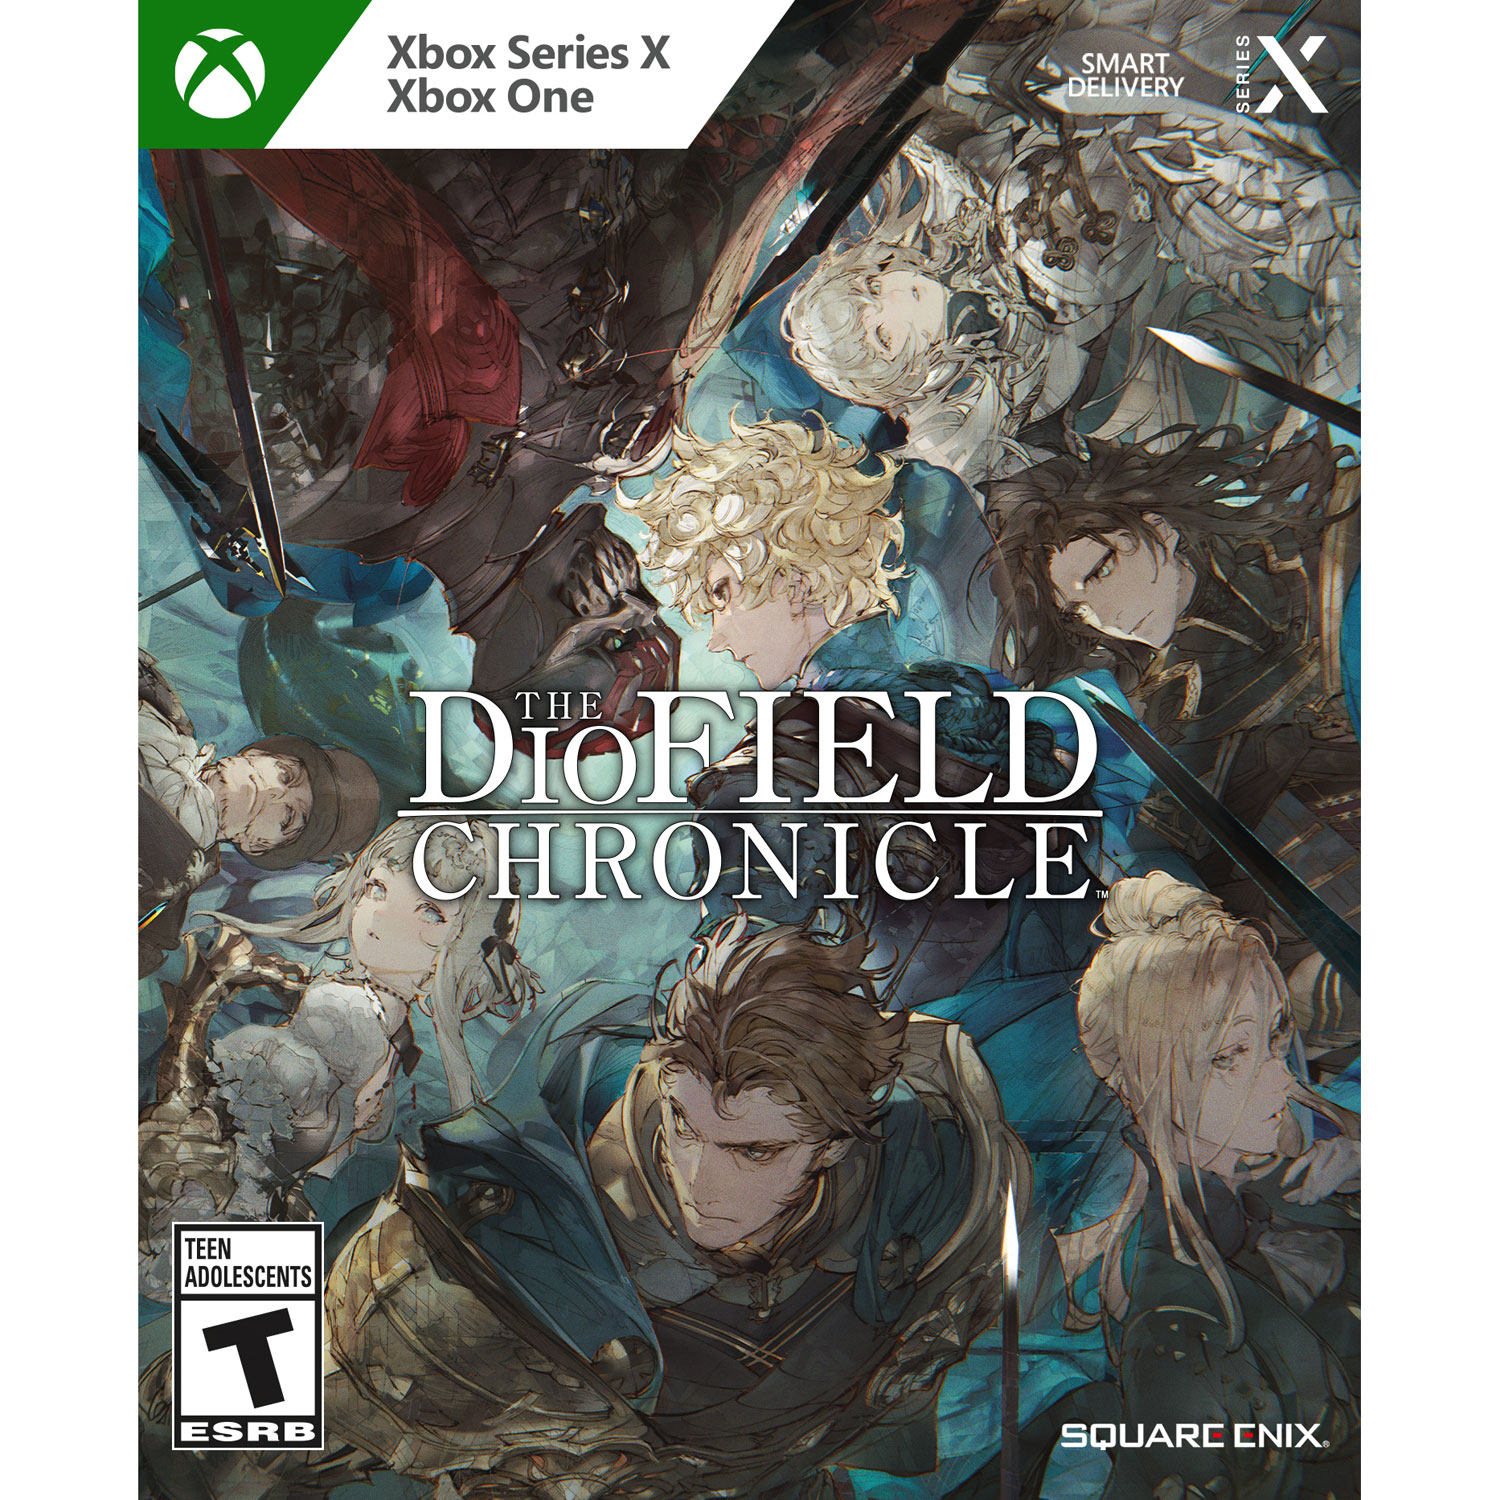 The DioField Chronicle (Xbox Series X / Xbox One)